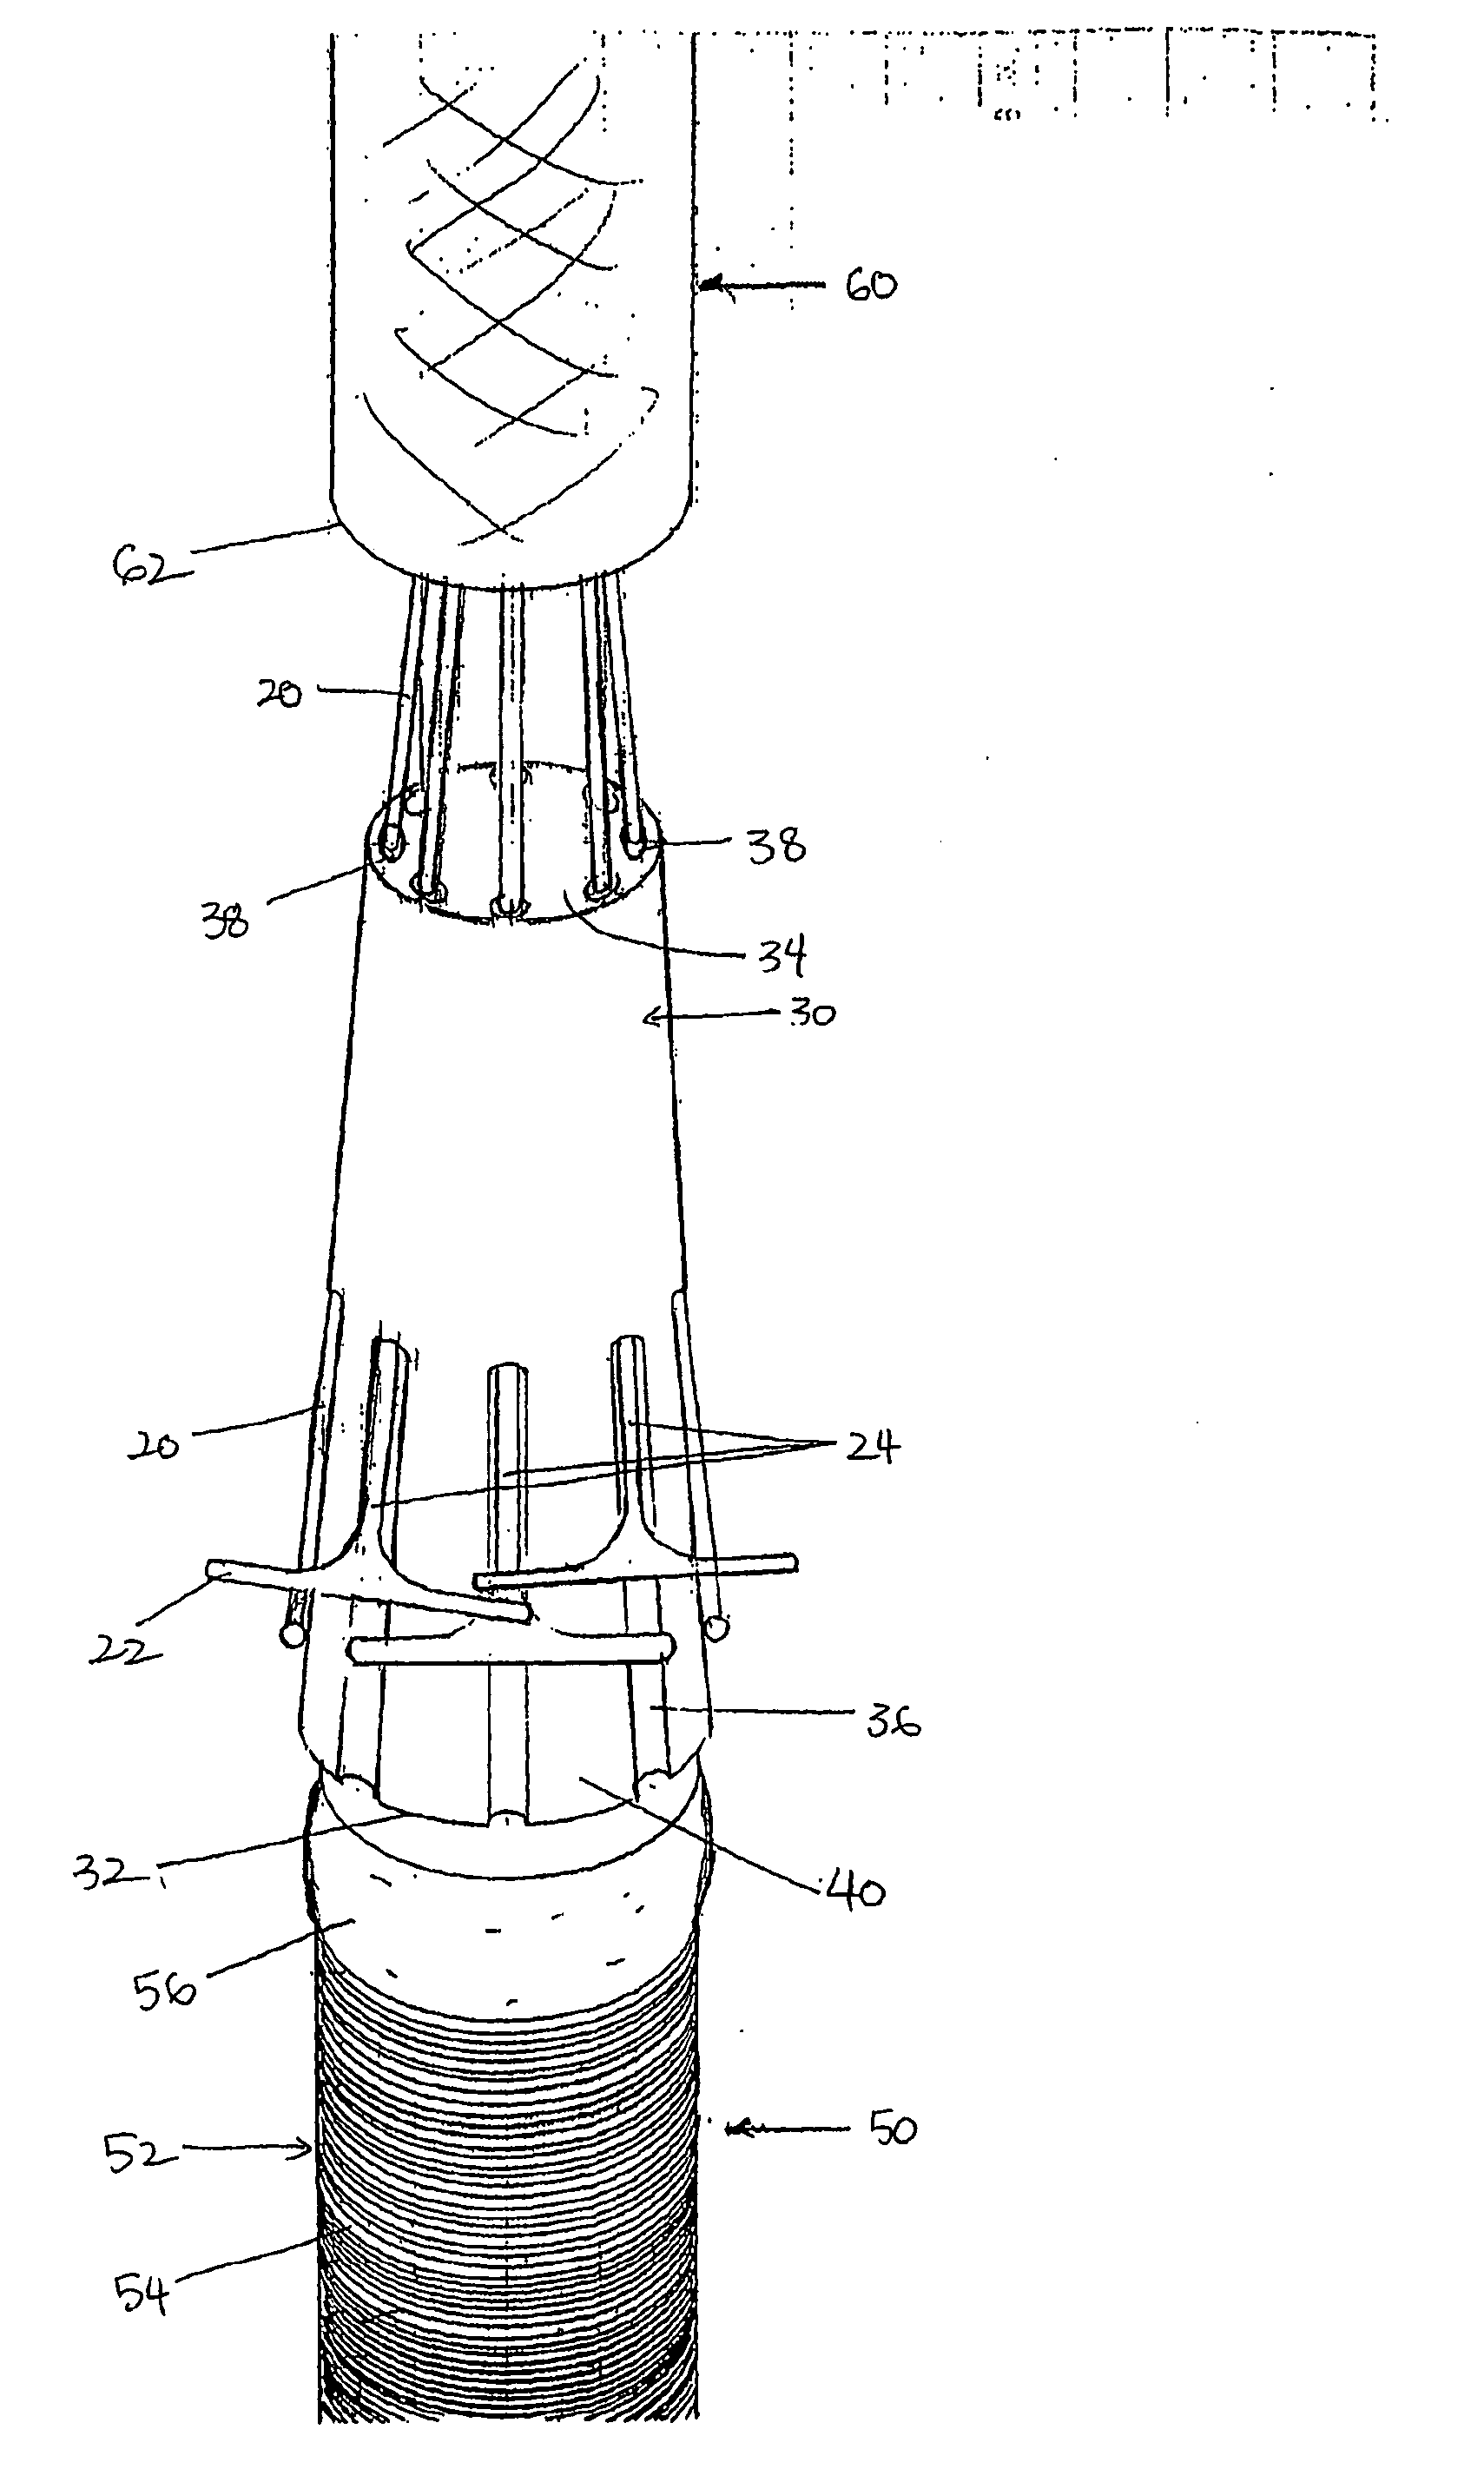 Method and apparatus for fitting grips